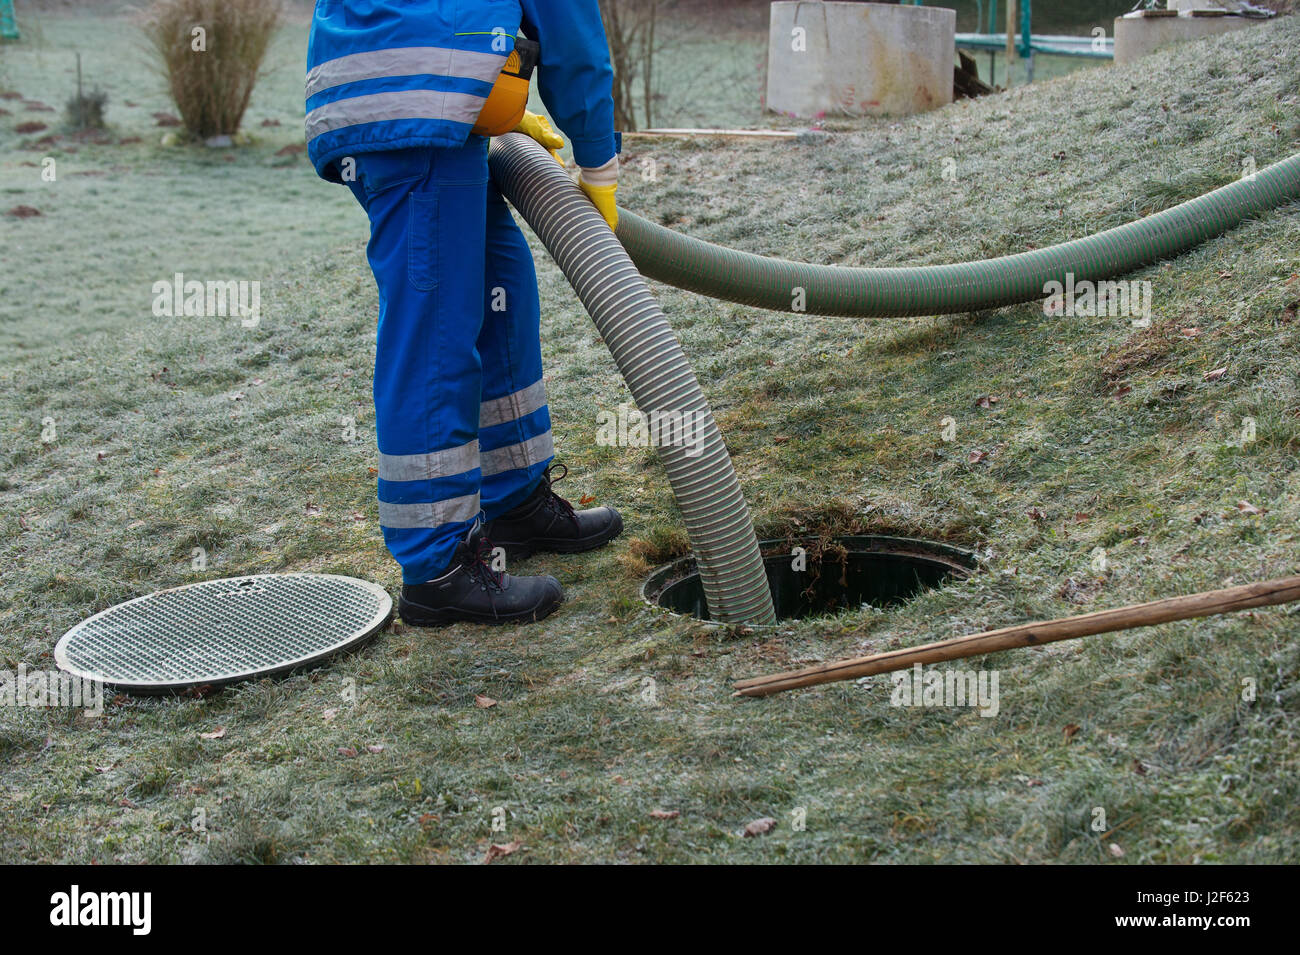 Emptying household septic tank. Cleaning sludge from septic system. Stock Photo